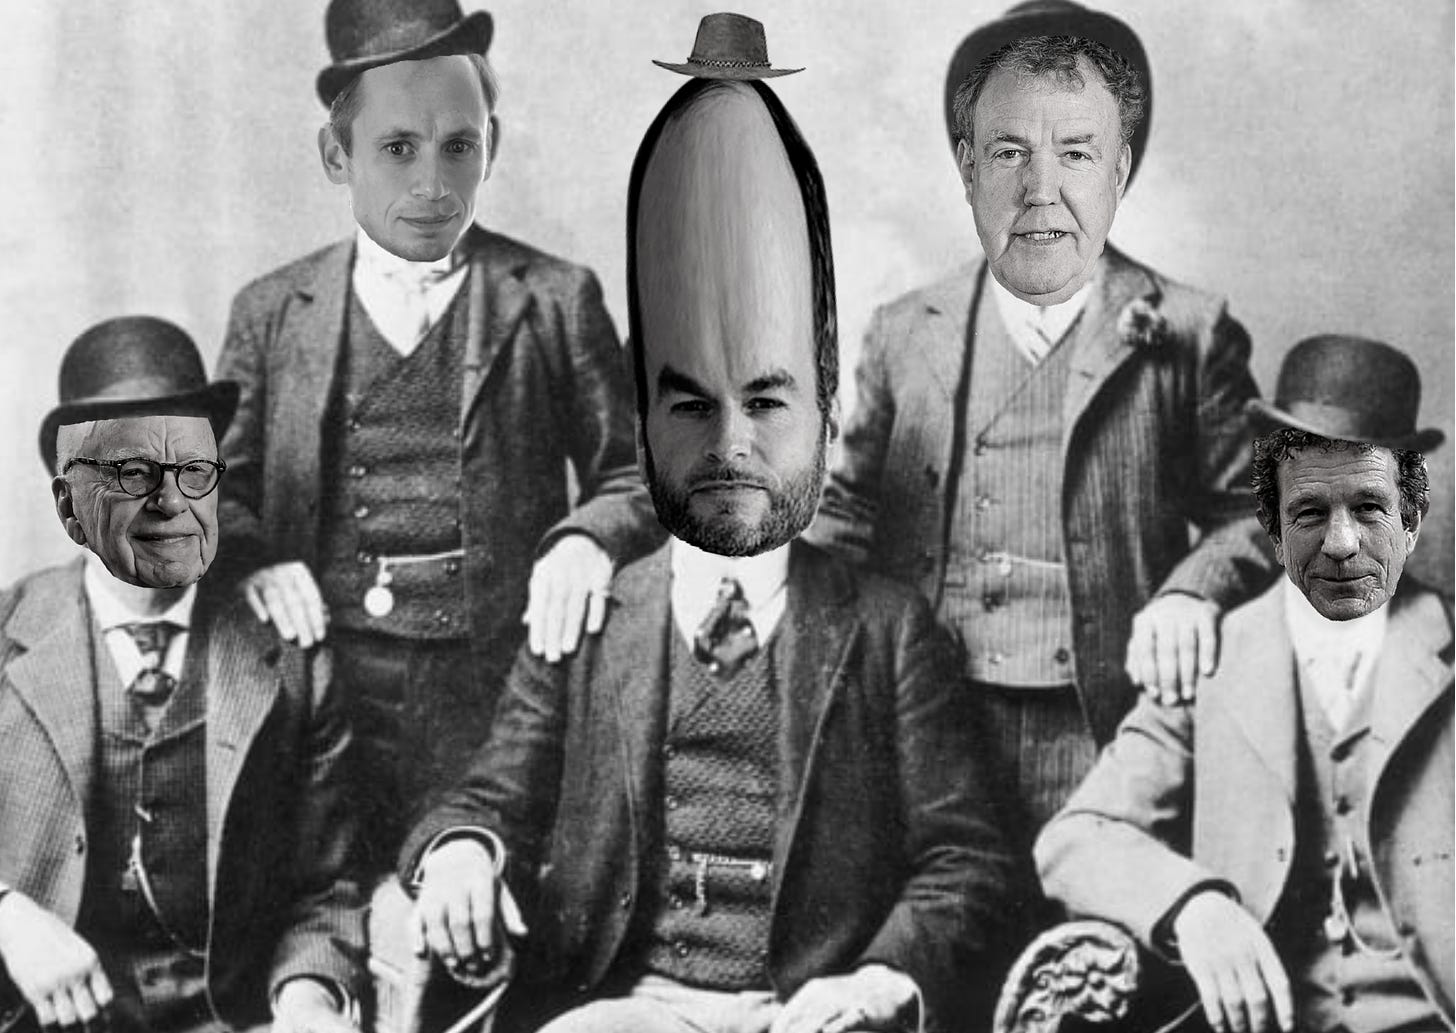 A gang of old-timey cowboys but it's Rupert Murdoch, Ross Clark, Brendan O'Neill with a huge forehead, Jeremy Clarkson, and Lord Faulks